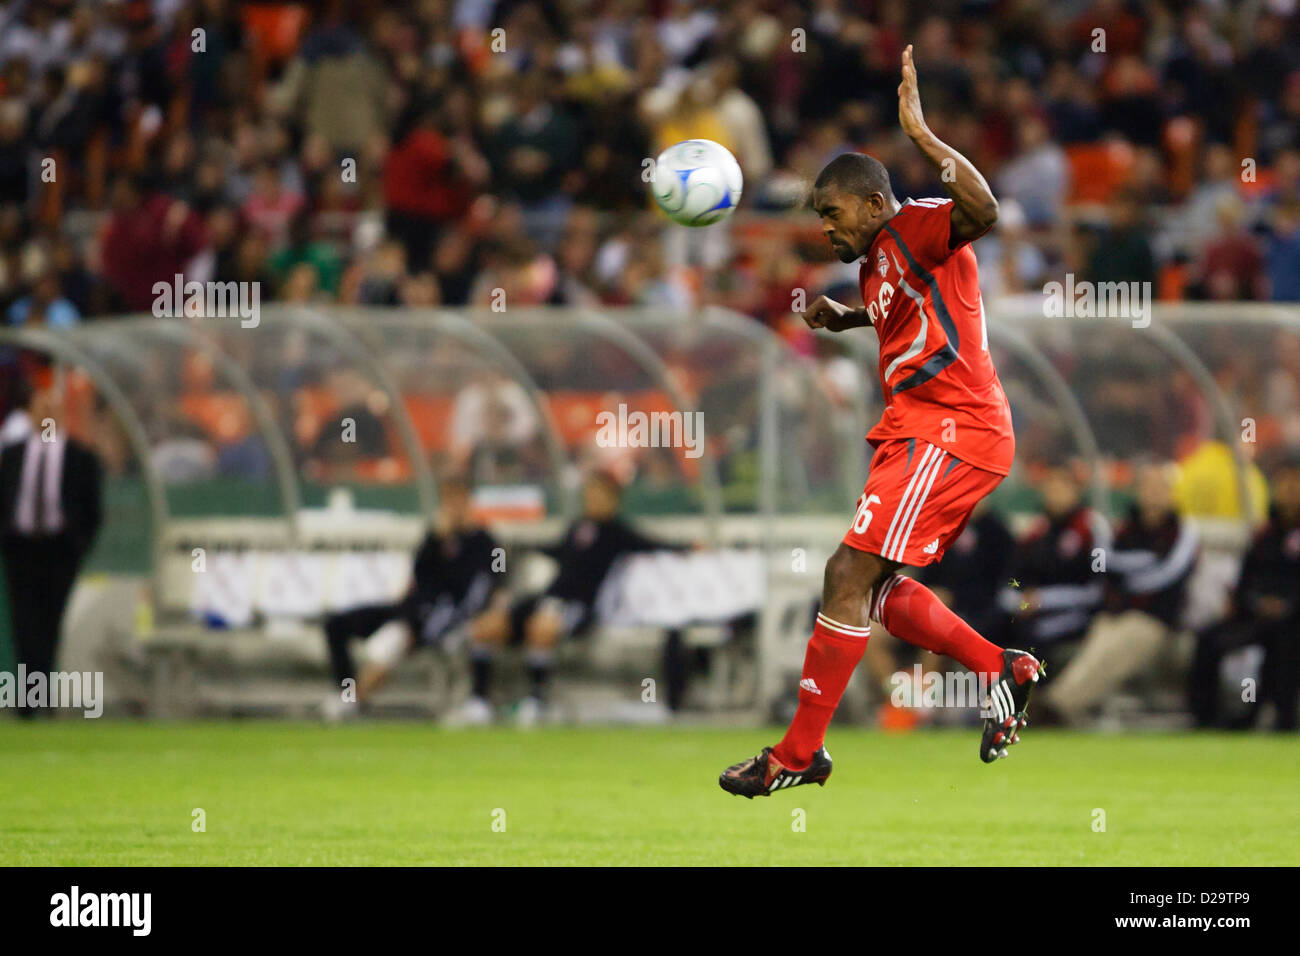 Marvell Wynne of Toronto FC heads the ball during the Major League Soccer match against DC United at RFK Stadium. Stock Photo